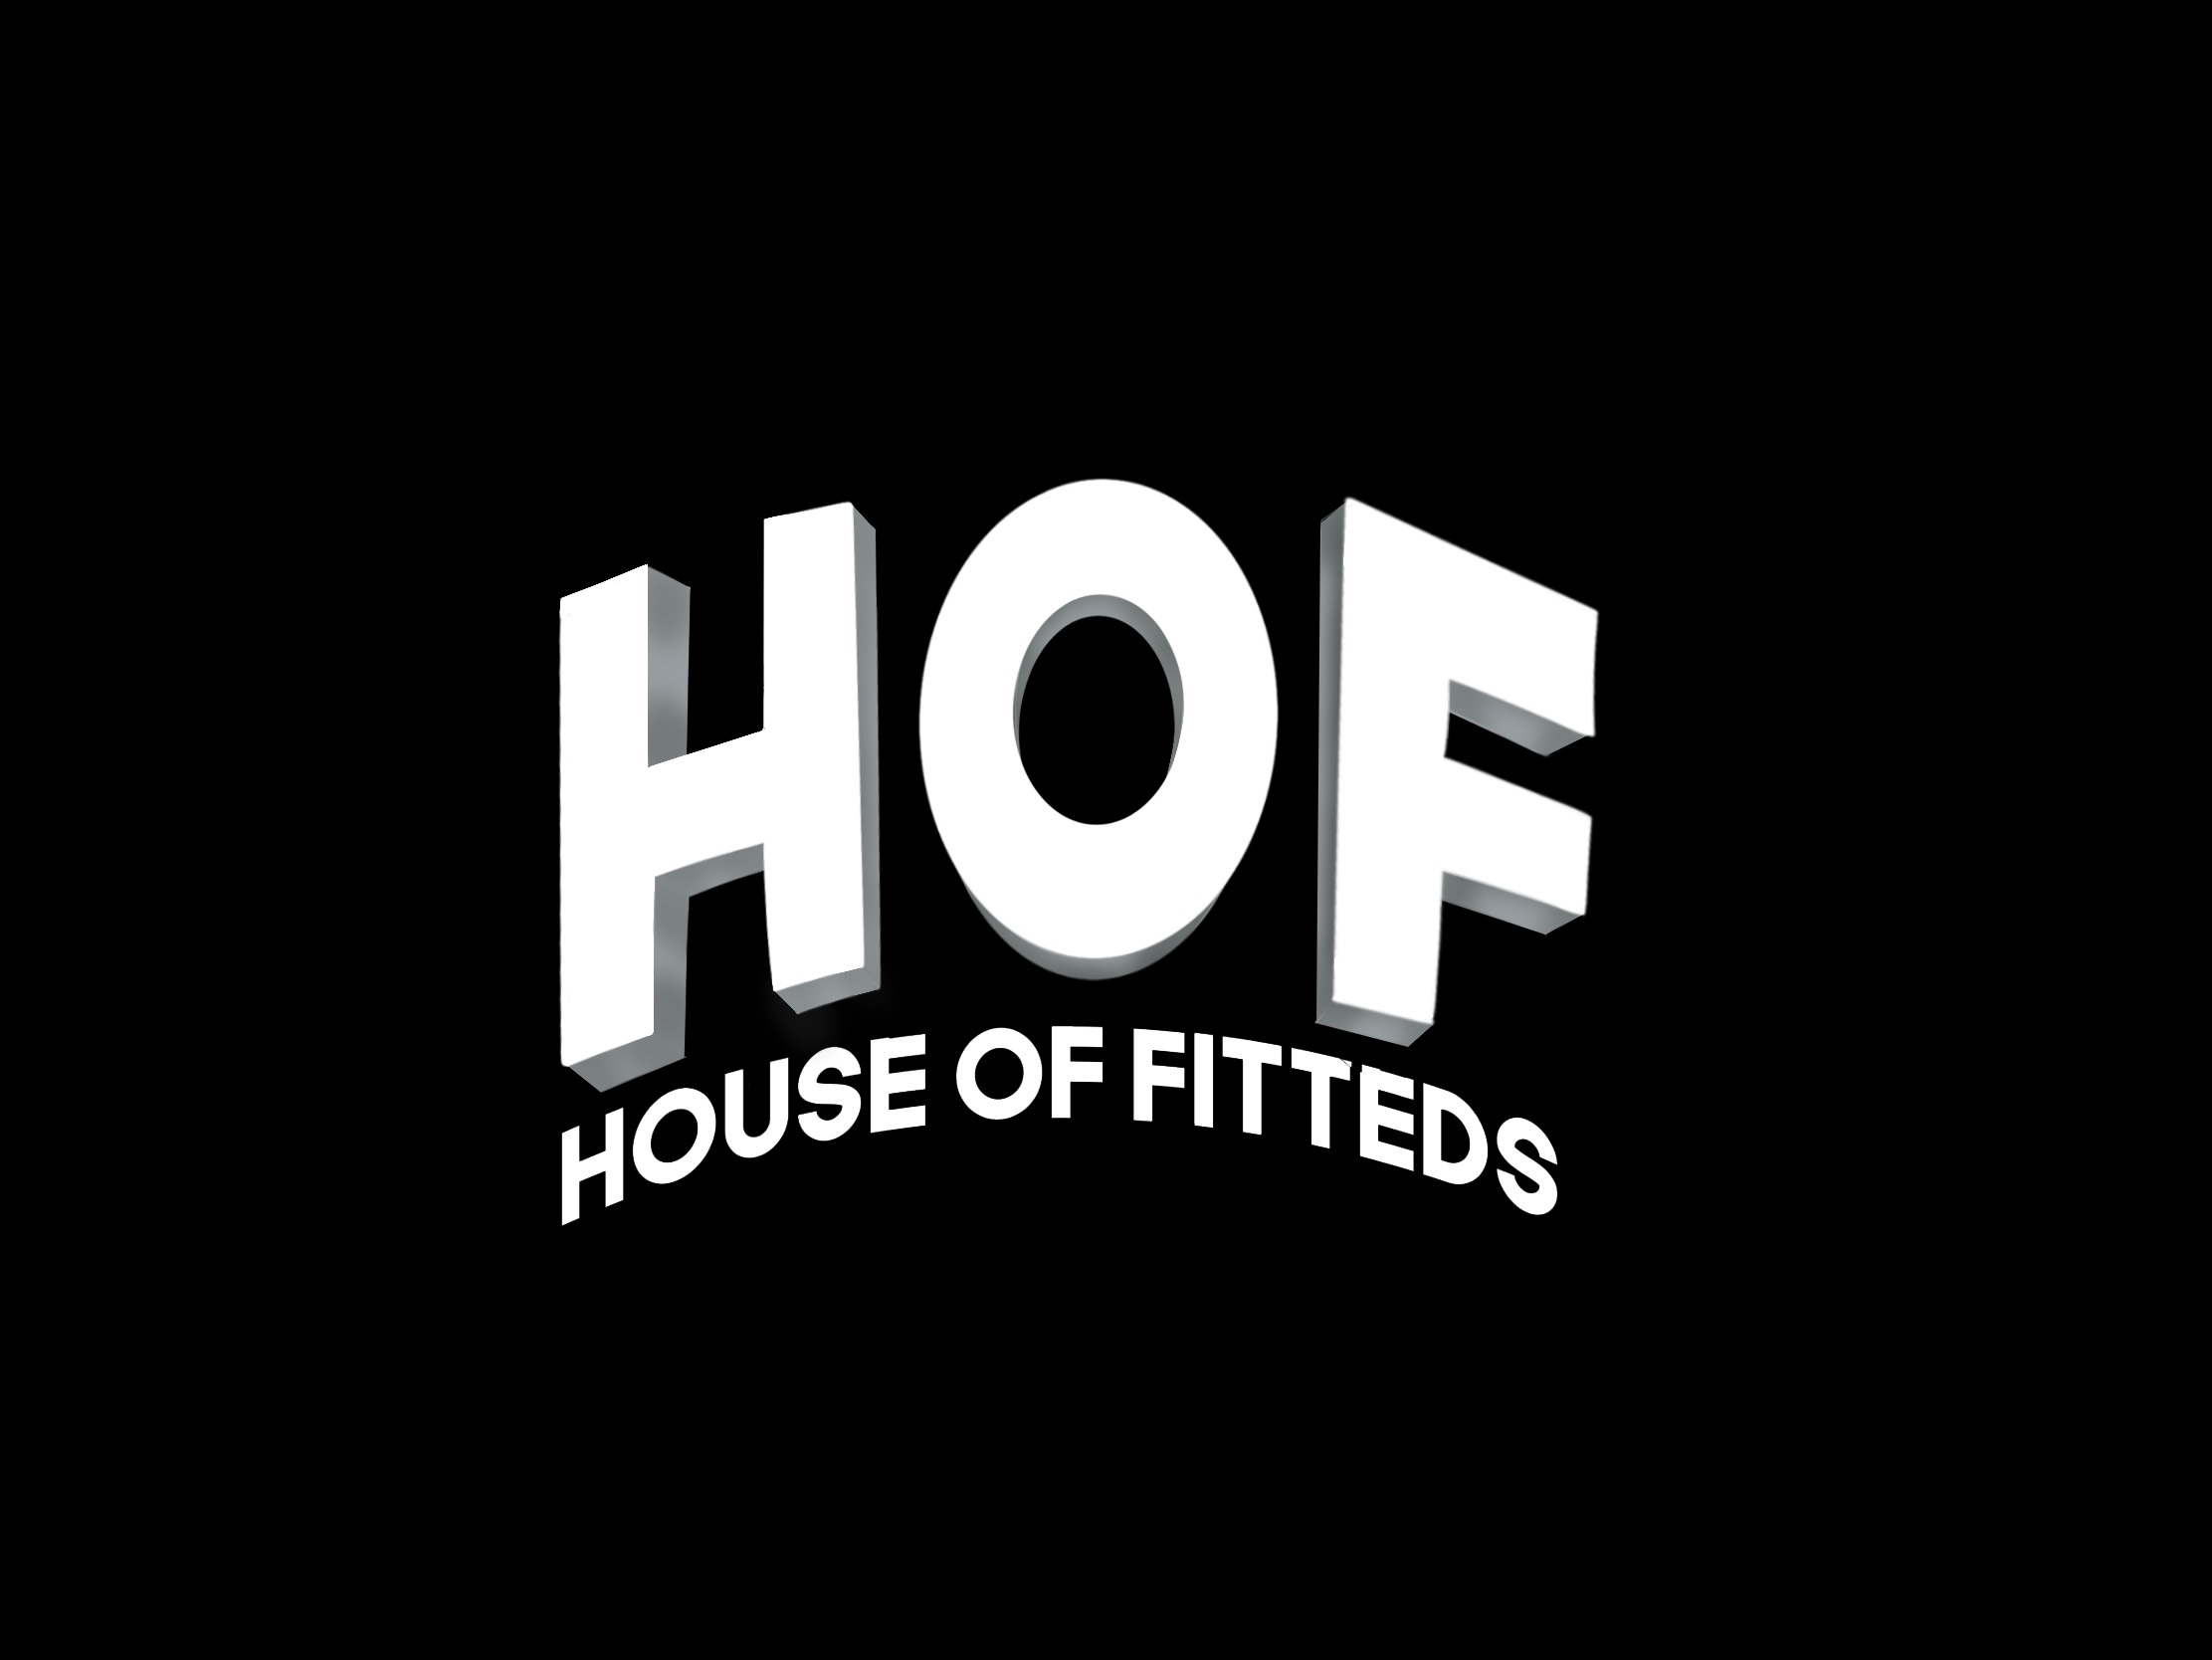 House of Fitteds